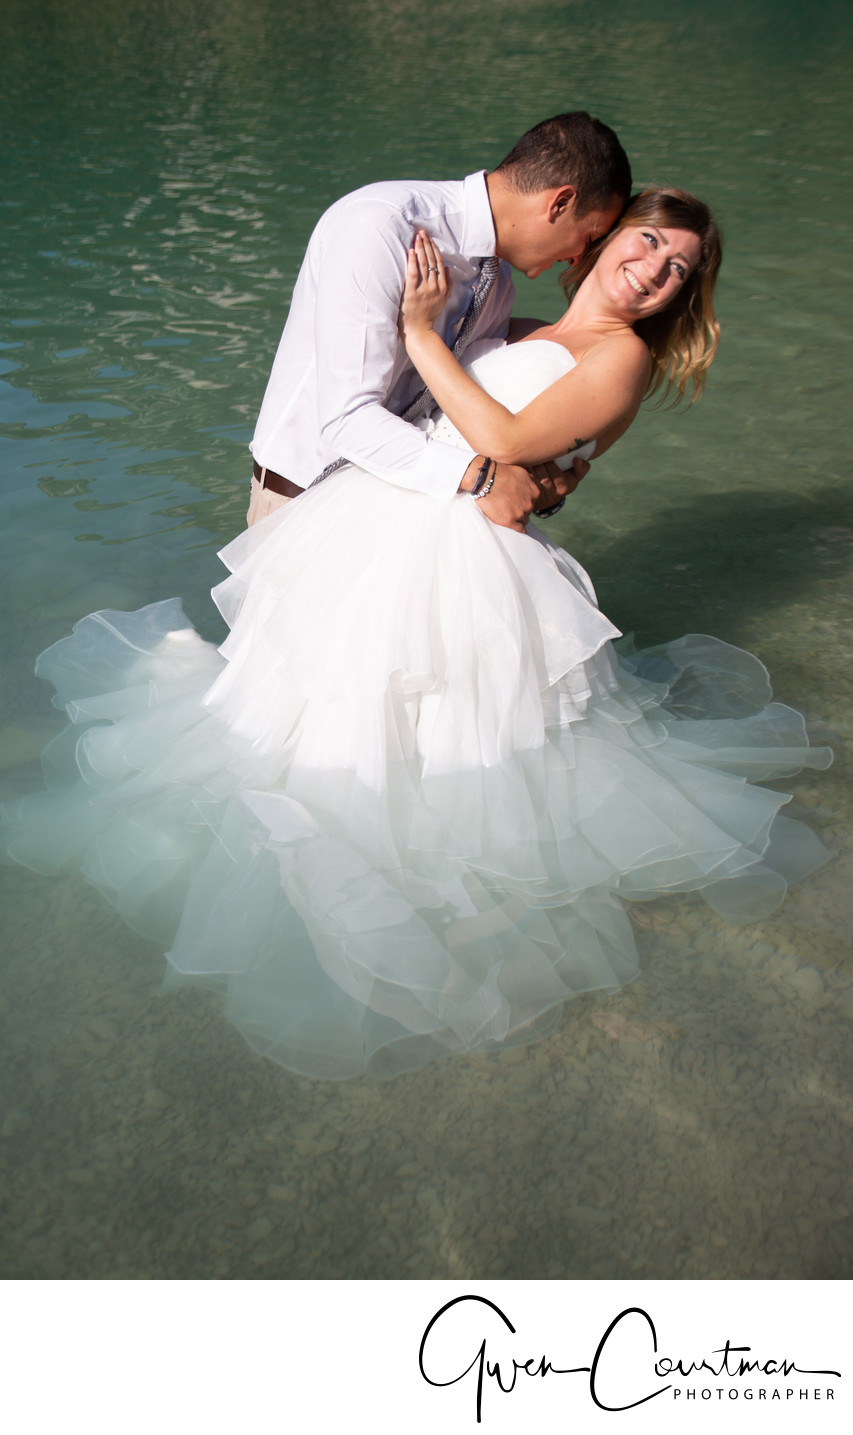 Drown the gown session Italy, Lake Tenno, Trentino